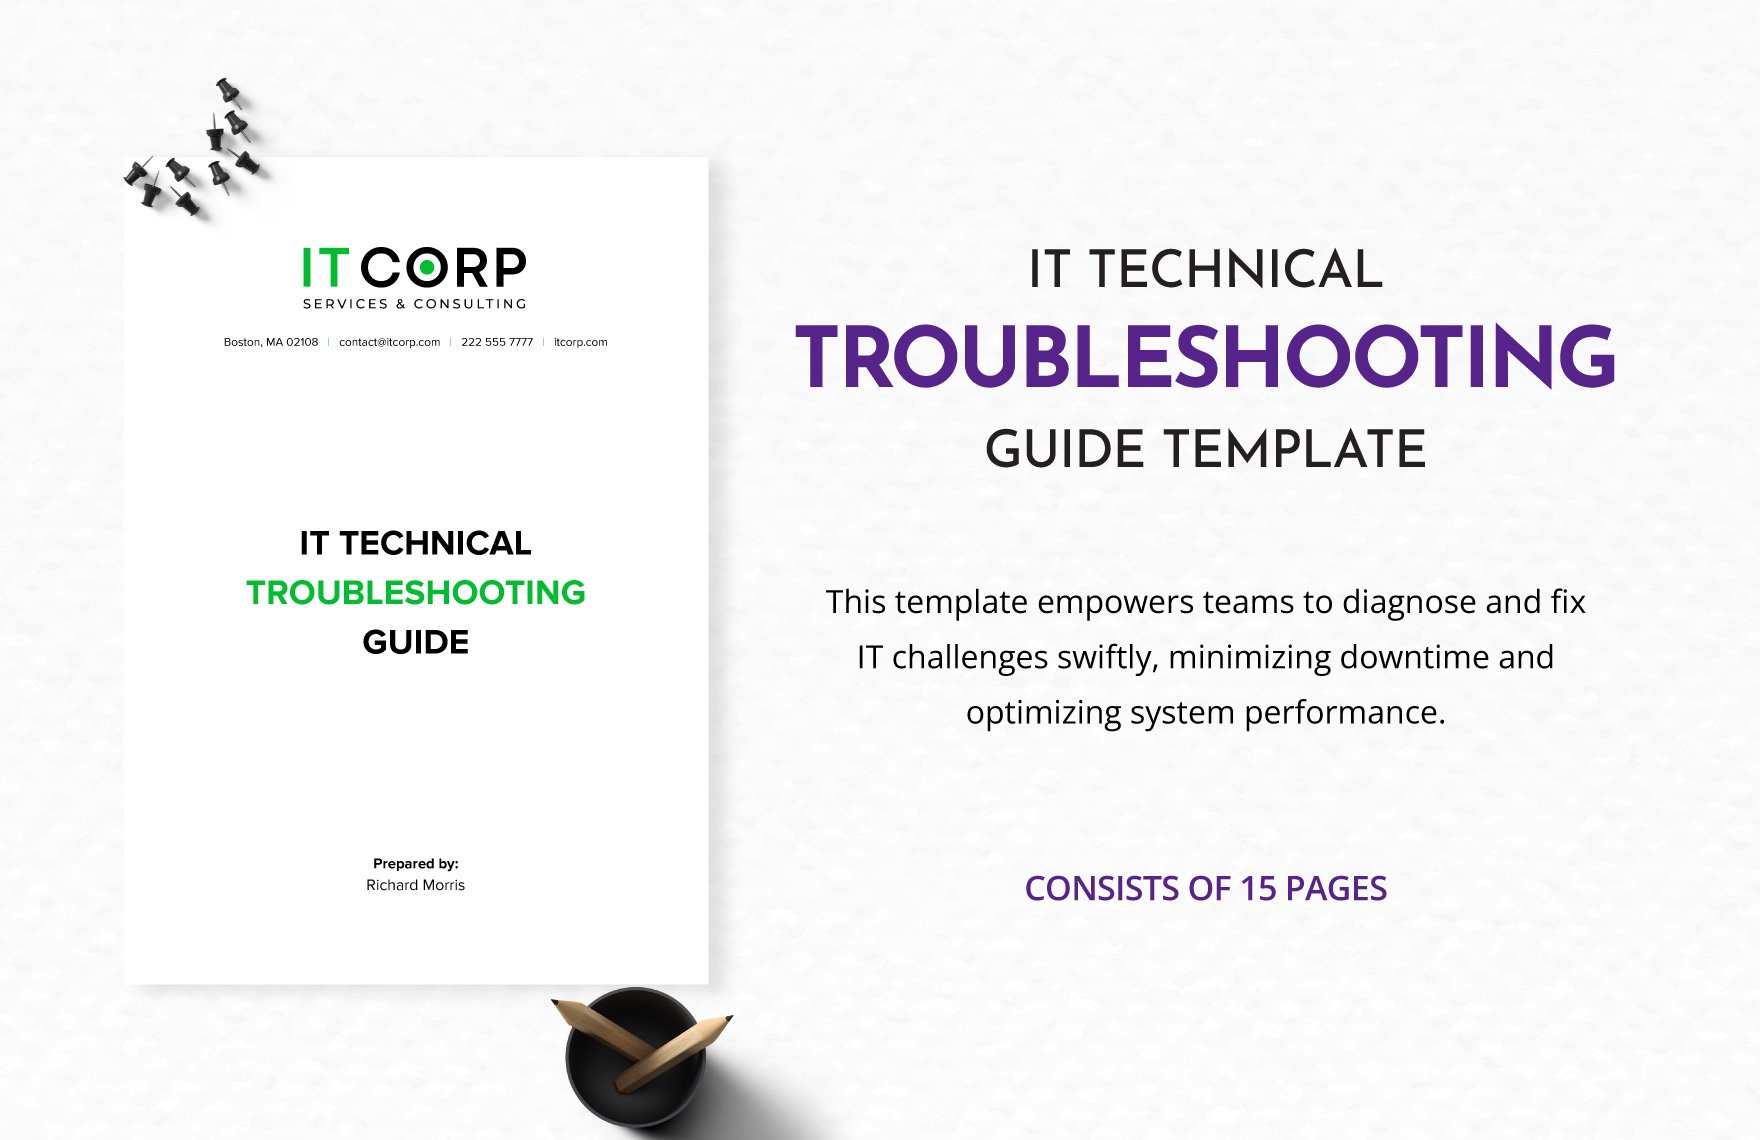 IT Technical Troubleshooting Guide Template